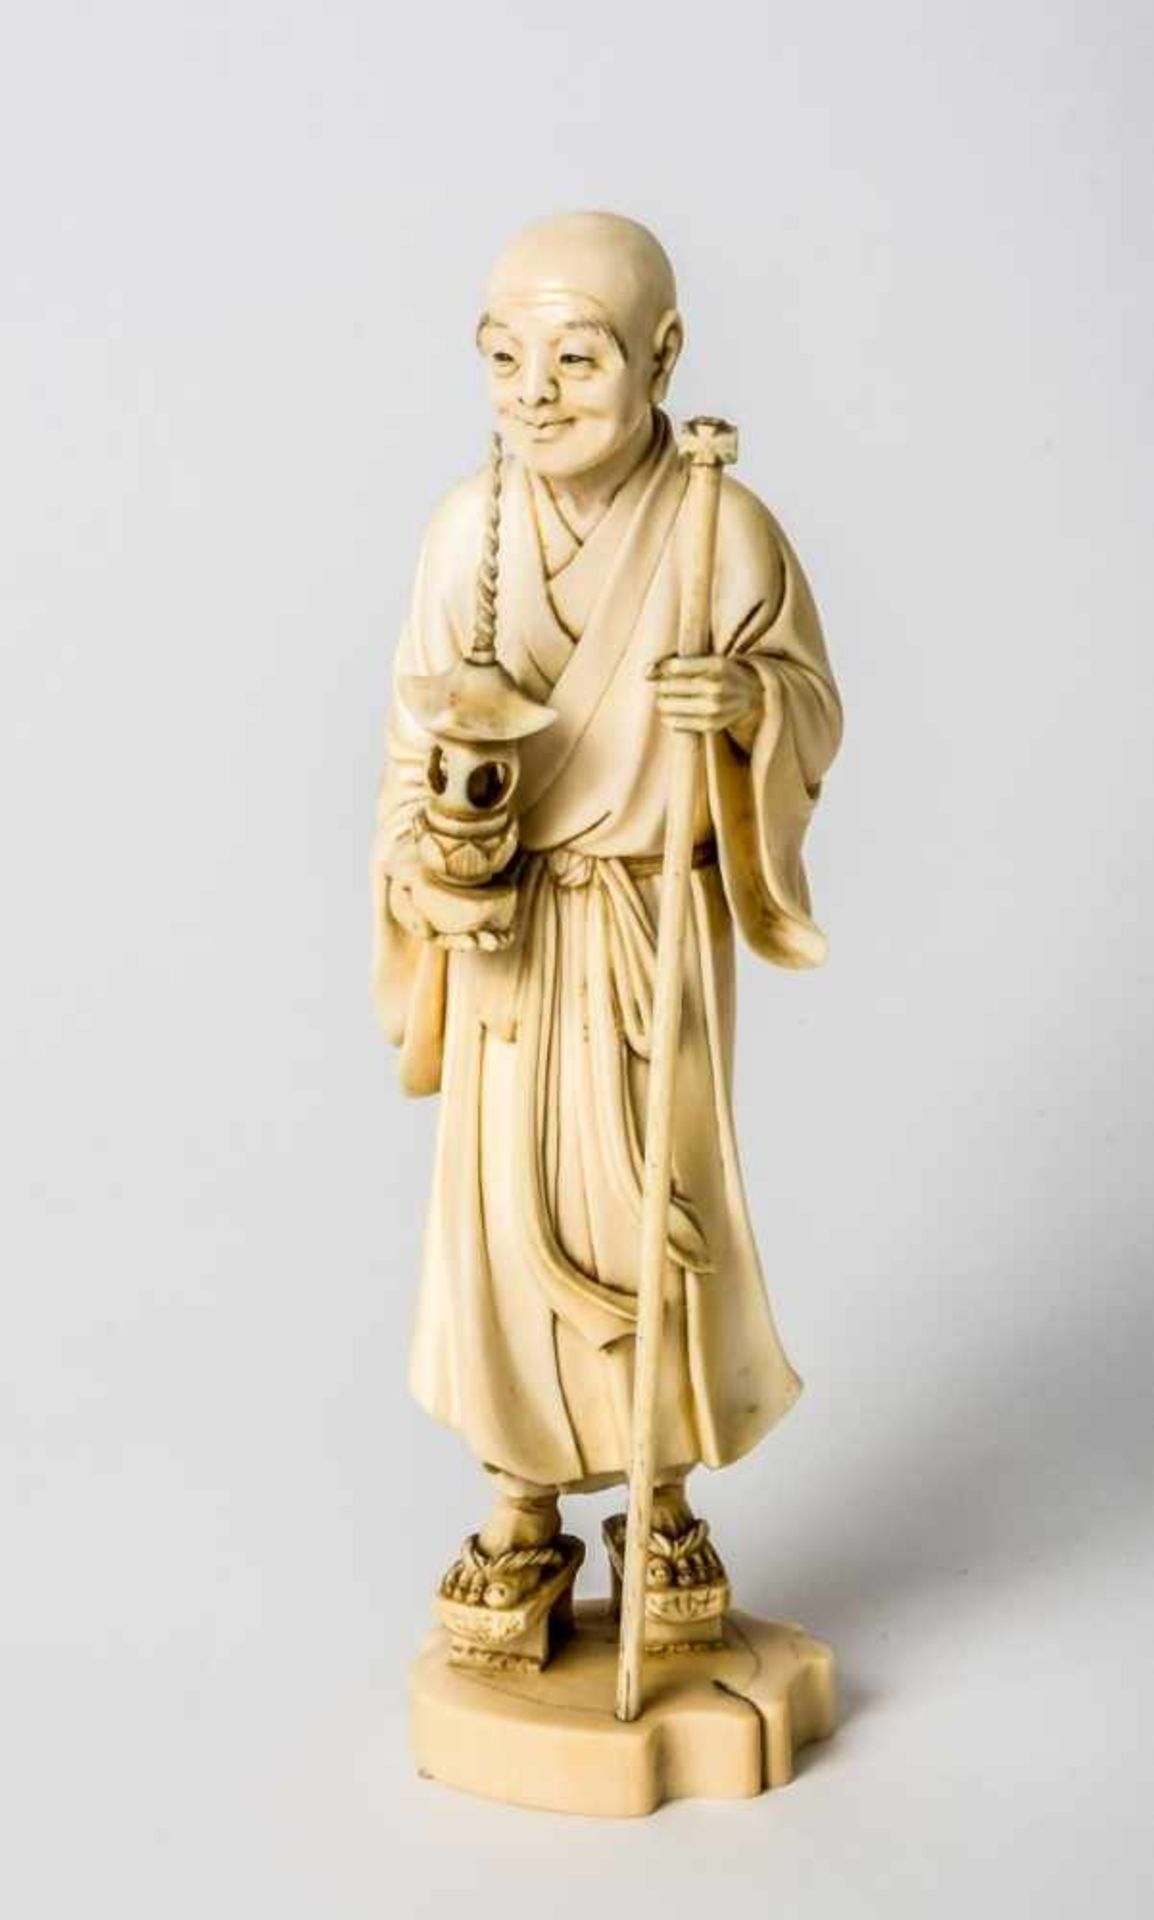 Okimono of a monk, Japan or China, ivory carving, probably around 1900, Height: ca. 18 cm//